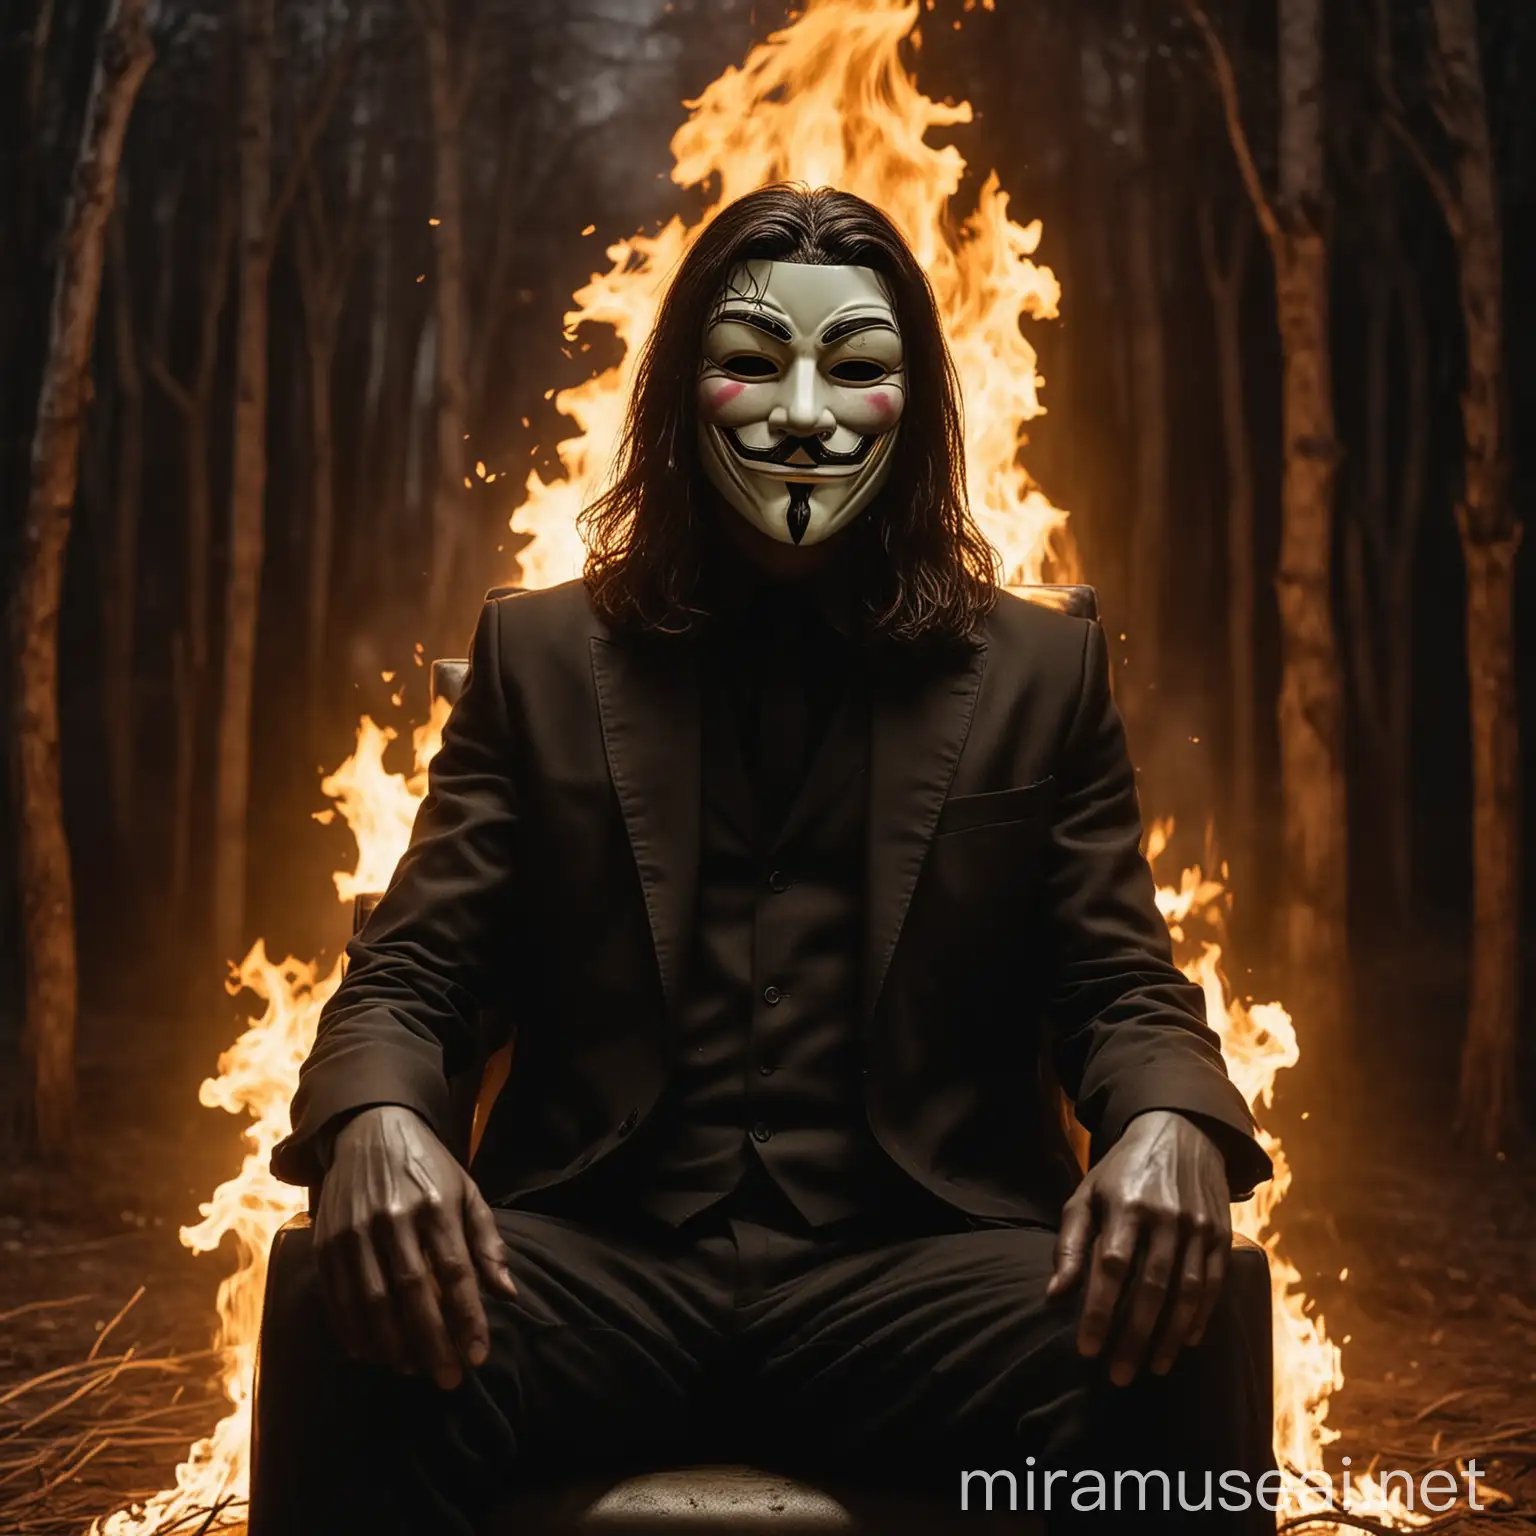 Mysterious Figure in Mask Amidst Fiery Forest